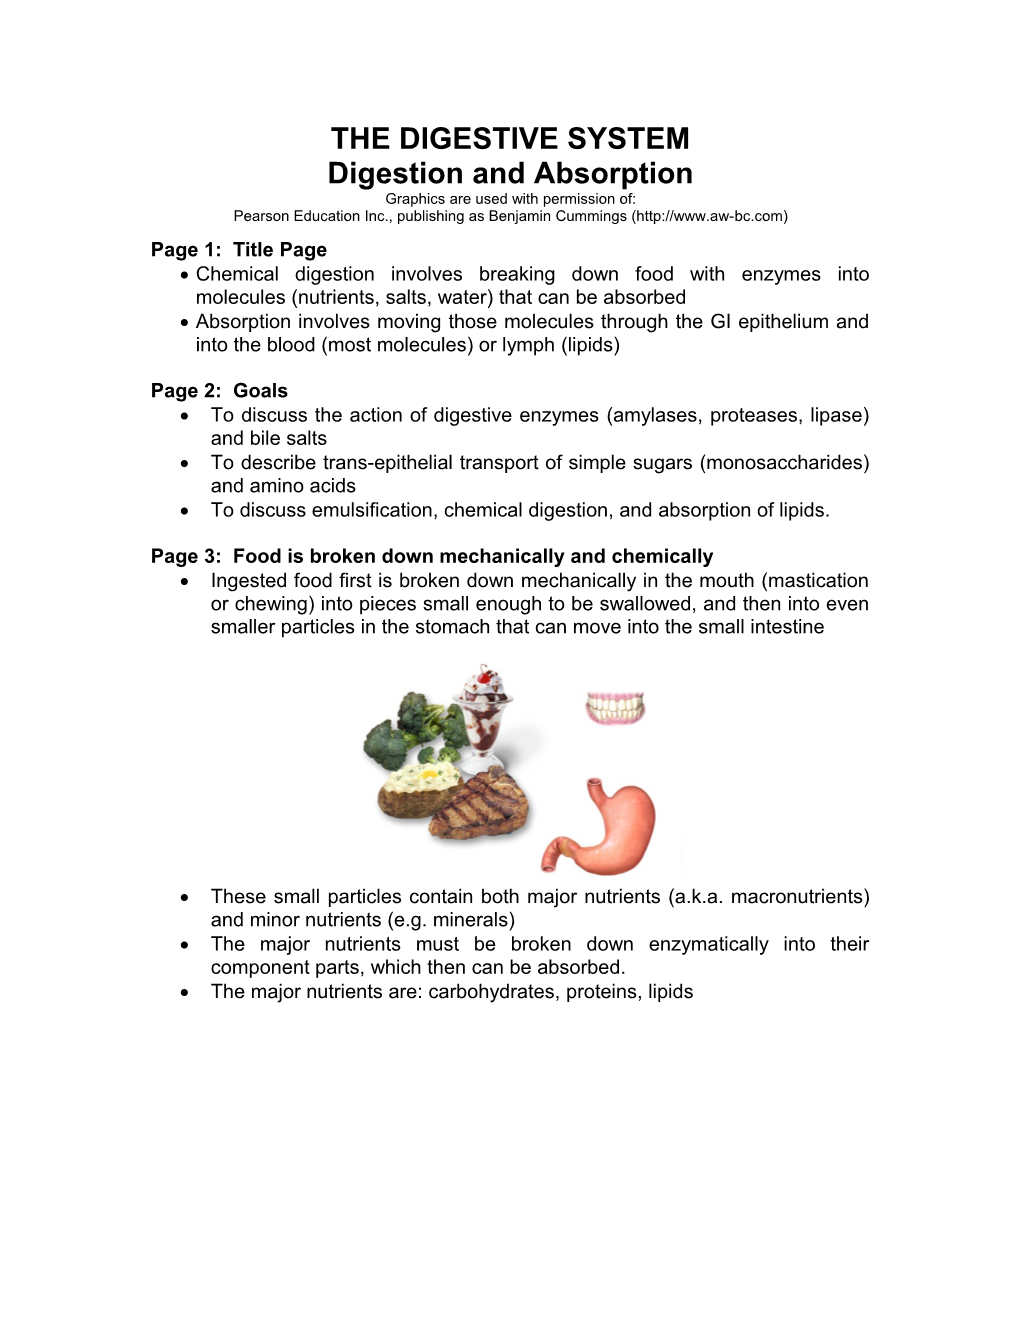 Anatomy Review: Digestive System s1